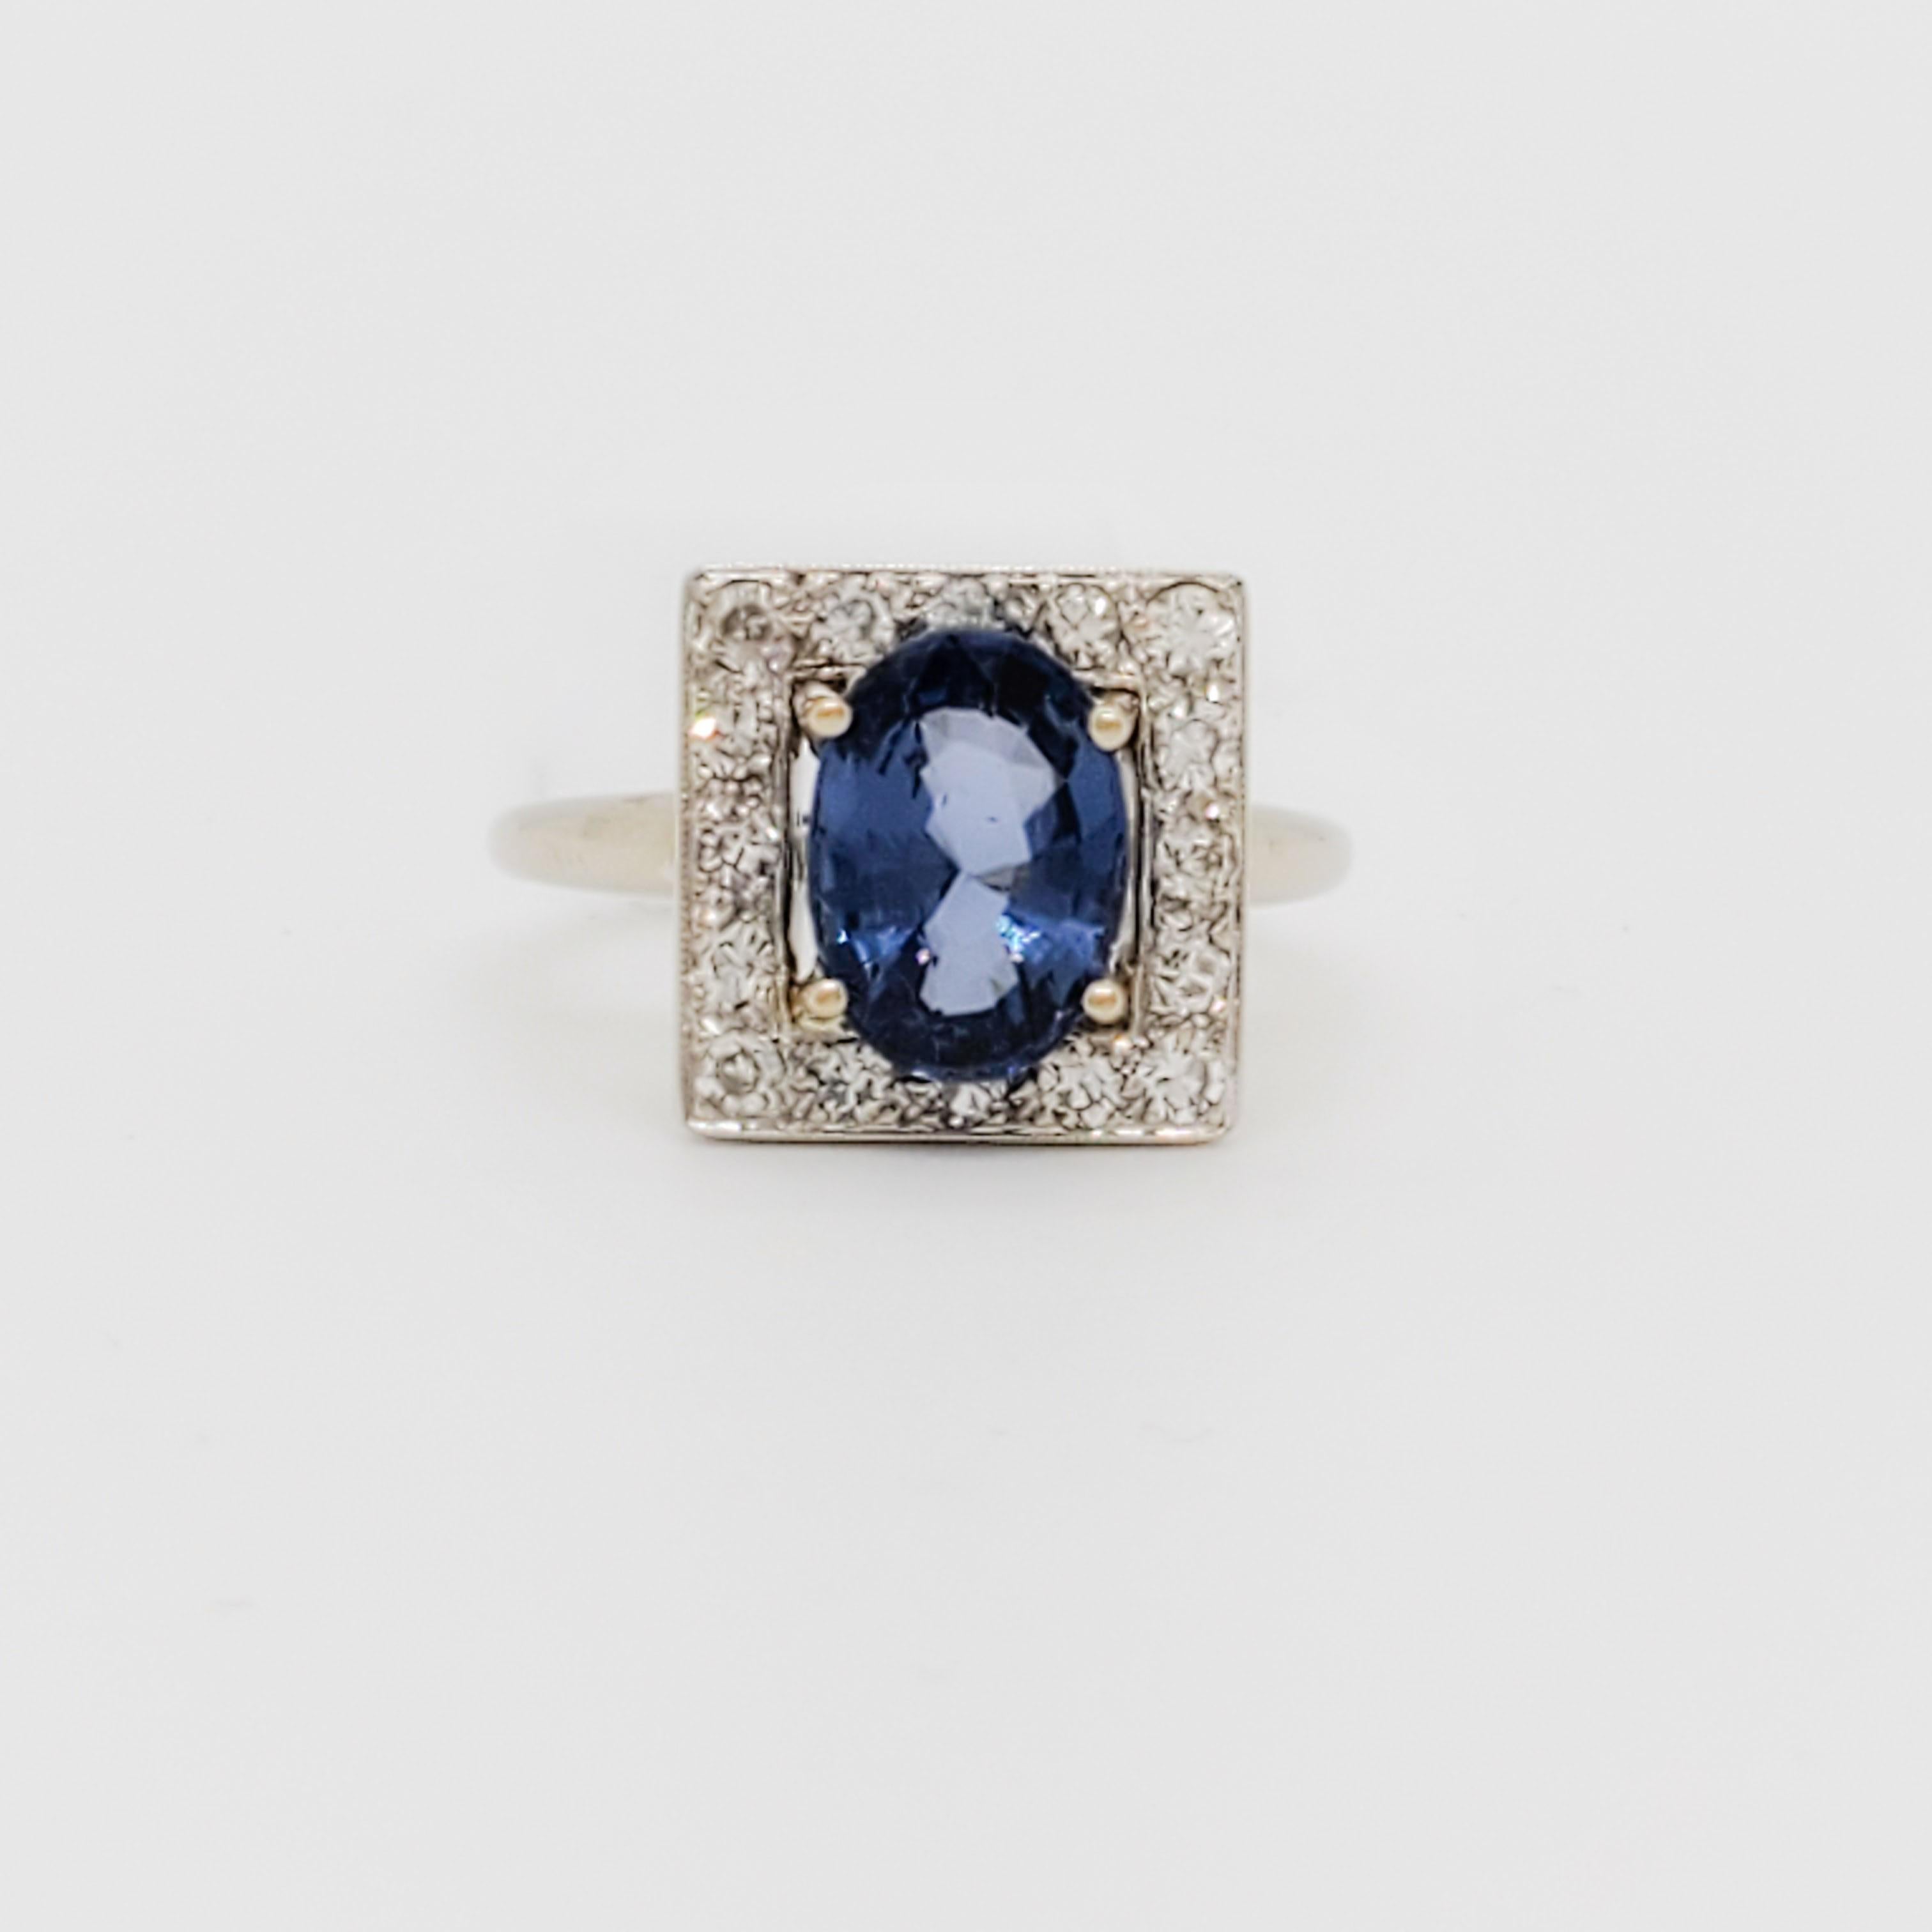 Beautiful 2.32 ct. blue spinel oval with 0.20 ct. good quality white diamond rounds.  Handmade in 14k white gold.  Ring size 6.75.